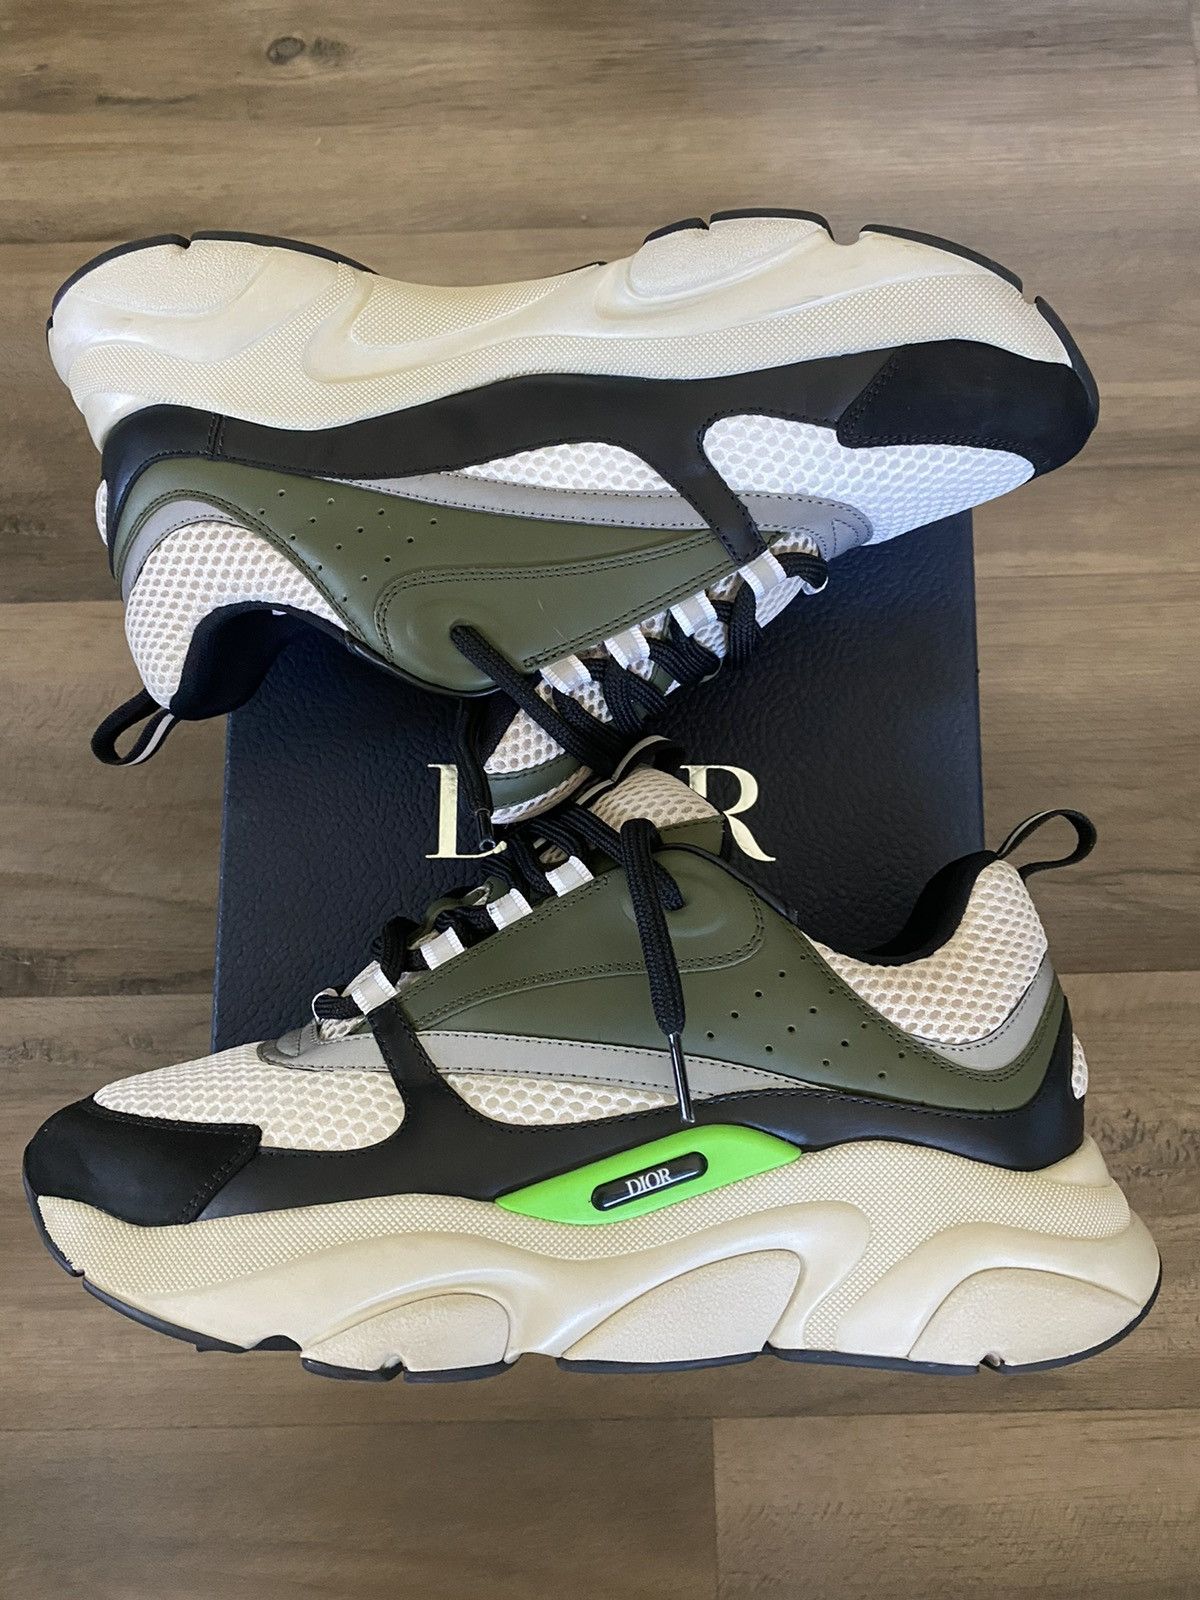 Christian Dior B22 Sneakers Green $600 Fast shipping: Item will be